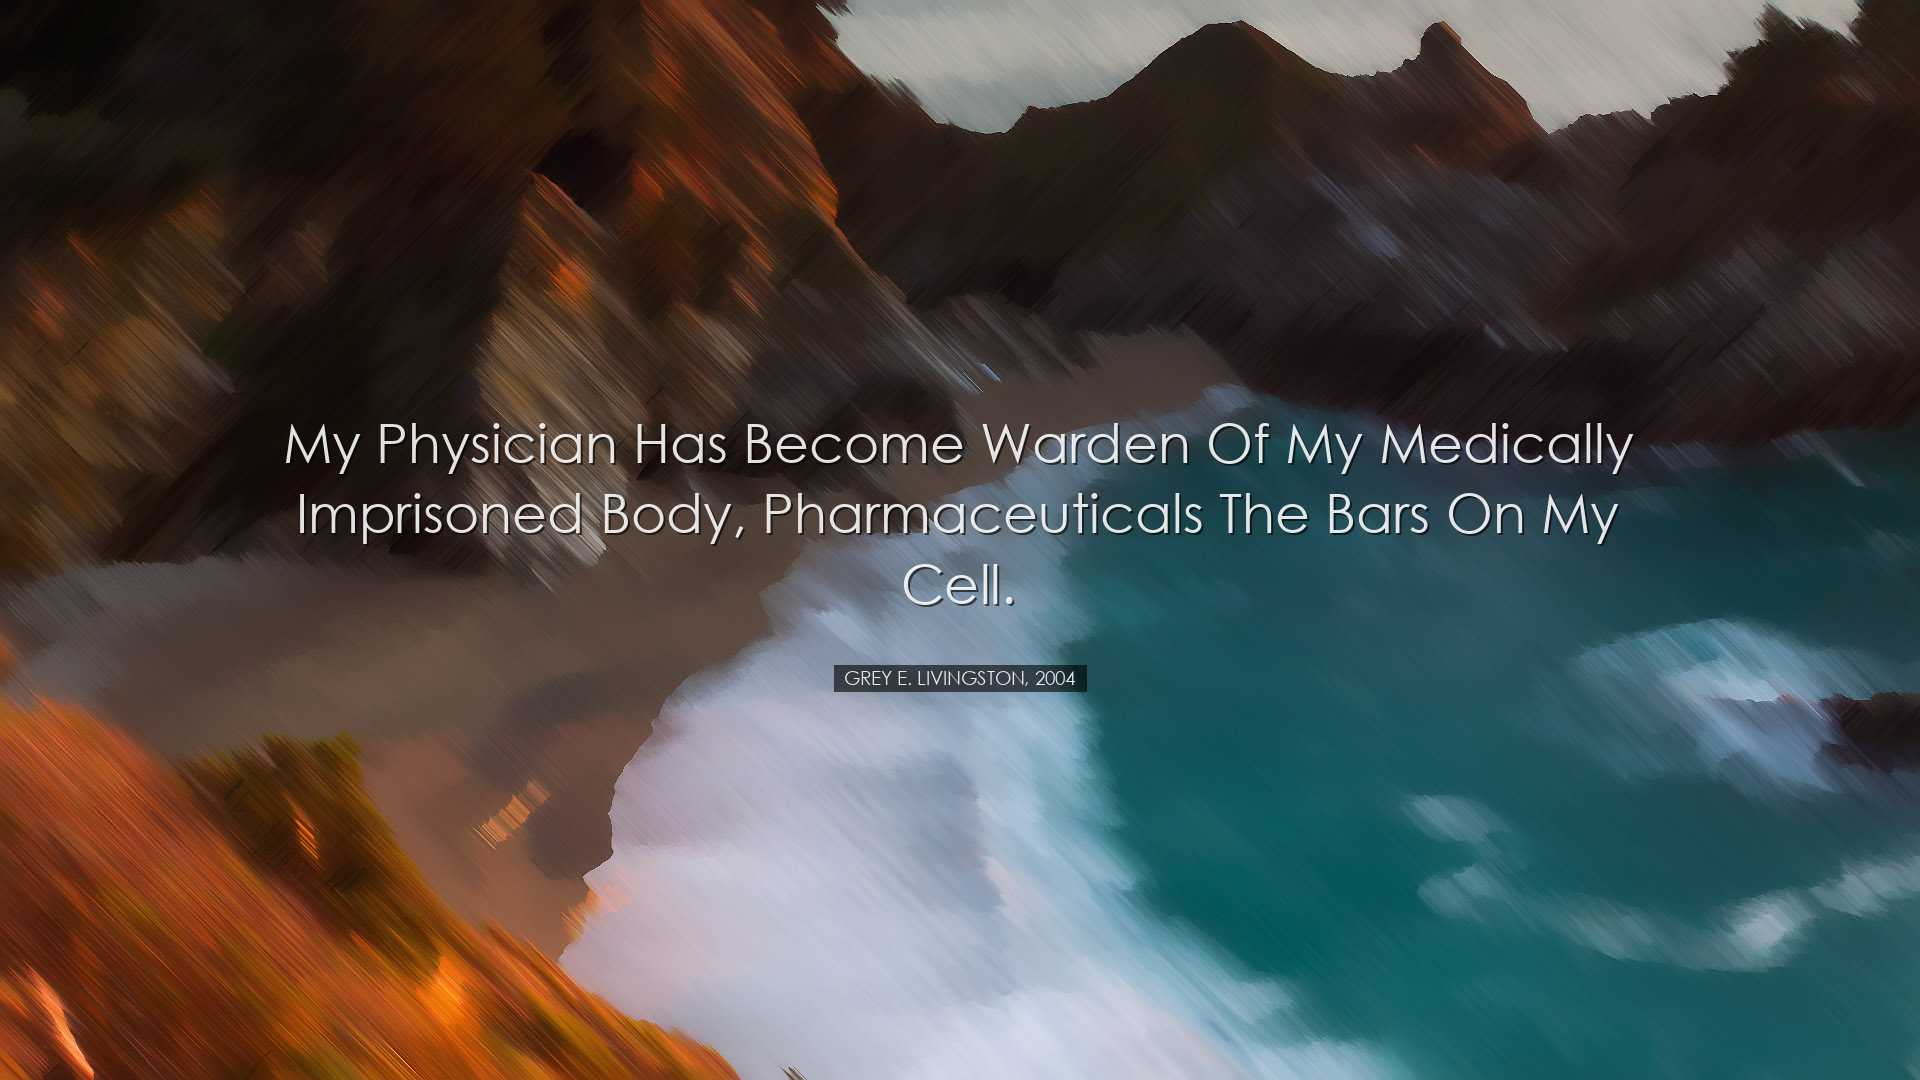 My physician has become warden of my medically imprisoned body, ph